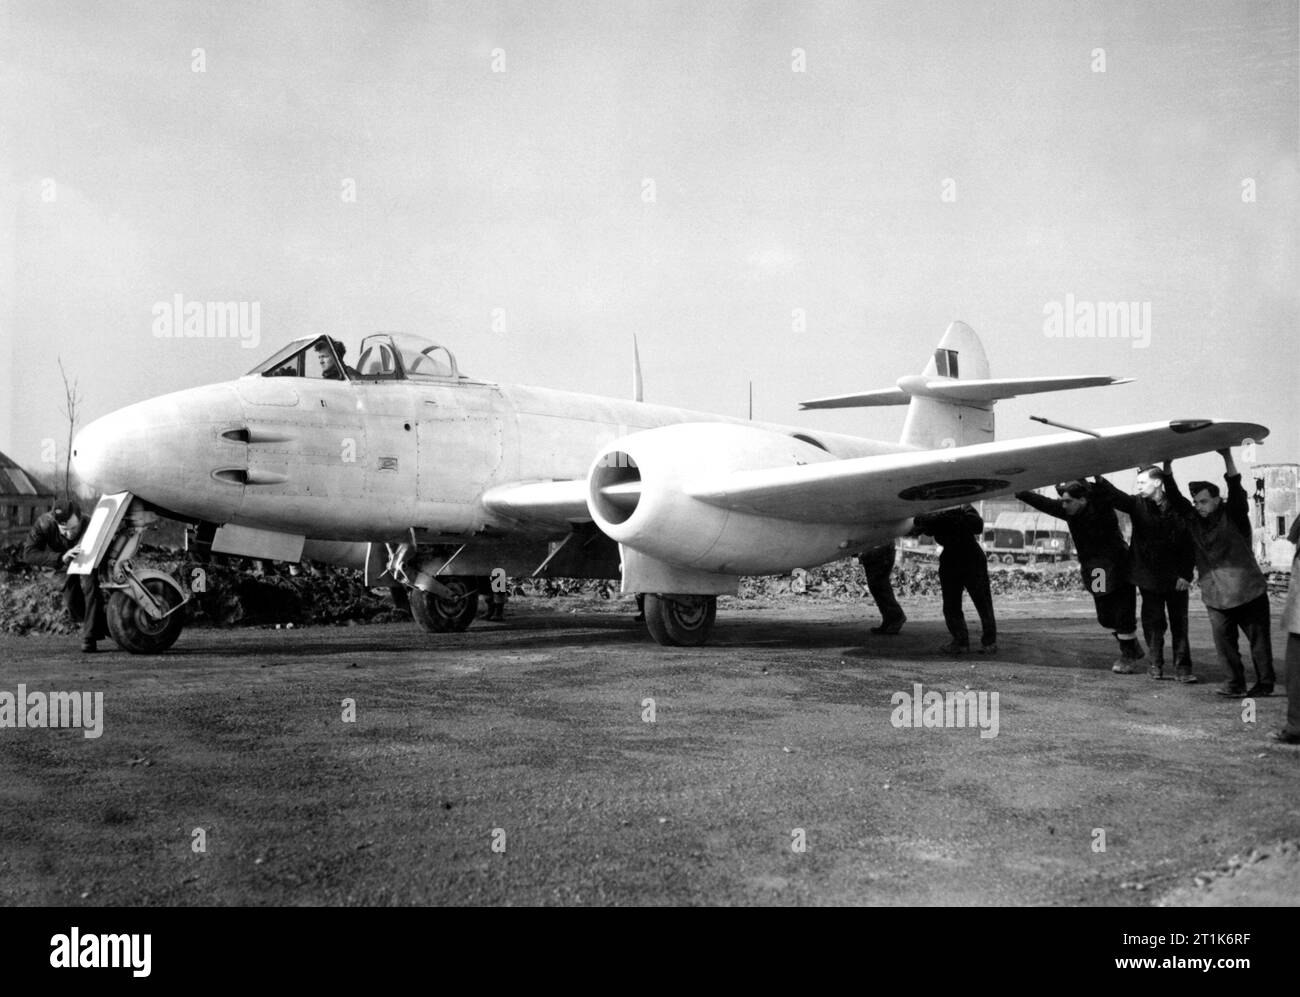 Ground crew manhandle a Gloster Meteor F.3 of the 616 Squadron Detachment at B58/Melsbroek, Belgium, on 6 February 1945. The aircraft had deployed to the Continent to counter the threat of the German Me262 jet fighter which had started to enter service with the Luftwaffe. The Meteor was the first British jet fighter and the Allies' only jet aircraft to achieve combat operations during the Second World War. The Meteor first flew in 1943 and commenced operations on 27 July 1944 with No. 616 Squadron RAF. Some of these images have had some dodging and burning done and have been retouched to remov Stock Photo